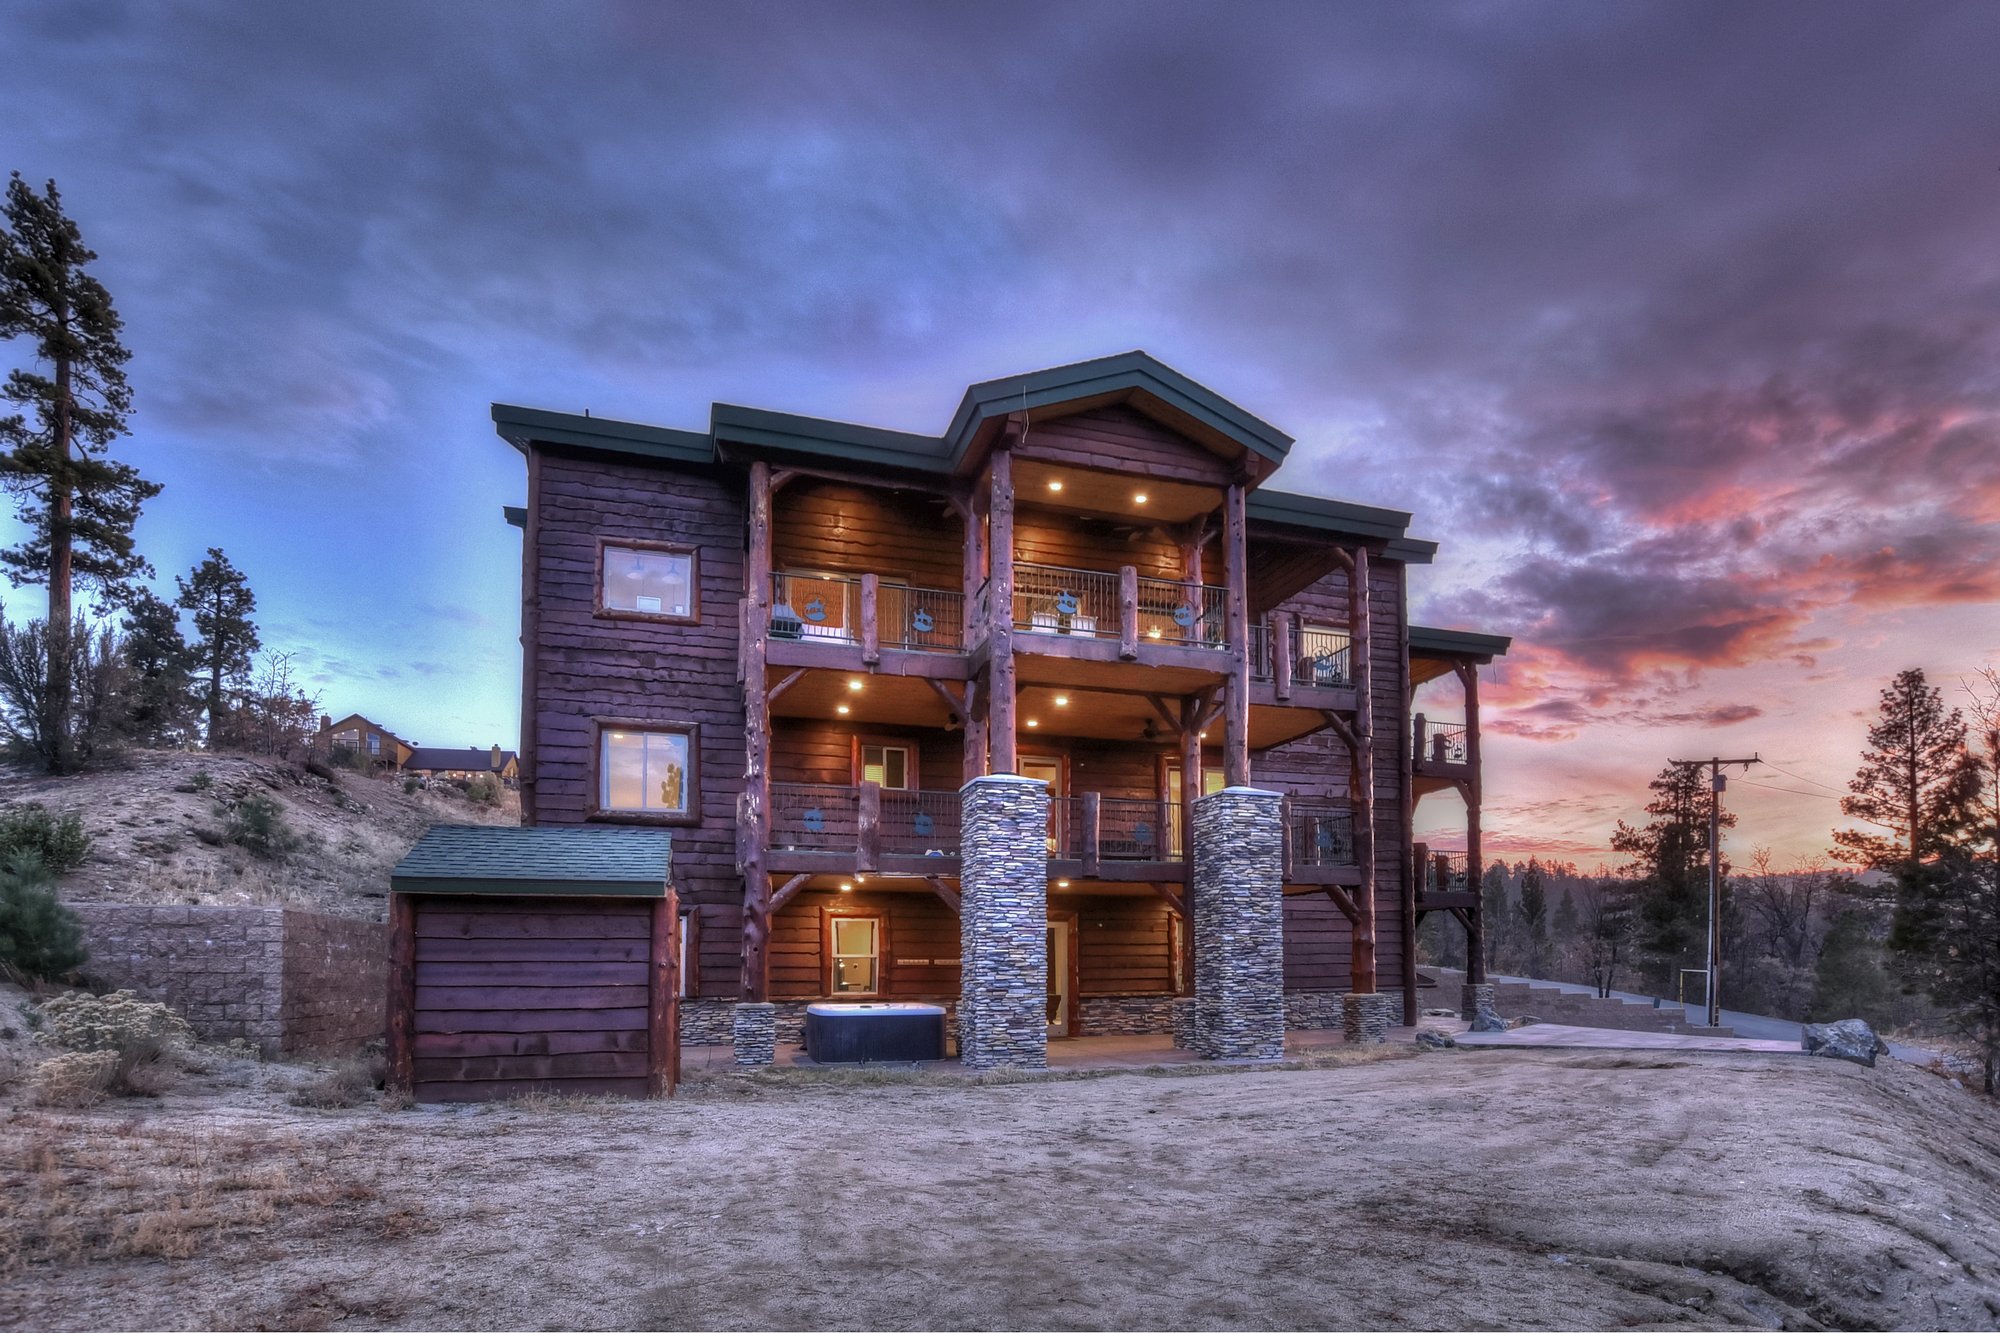 4 Questions to Ask When Booking A Big Bear Lake Cabin Rental